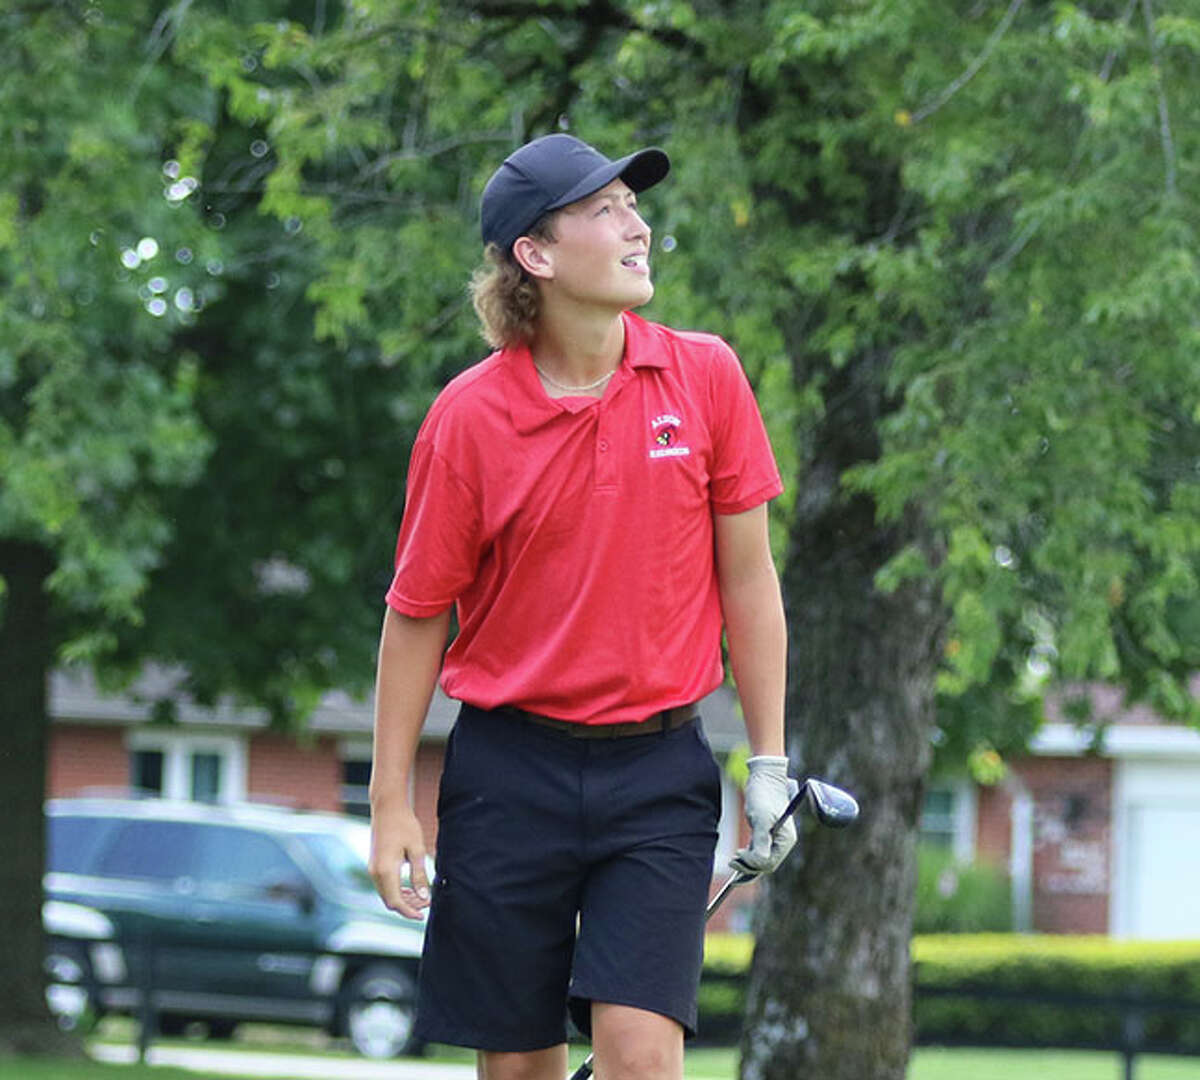 Alton junior Cooper Hagen watches his tee shot on hole No. 3 at Belk Park in Thursday's Madison County Tournament in Wood River. Hagen shot 85 in the tourney.